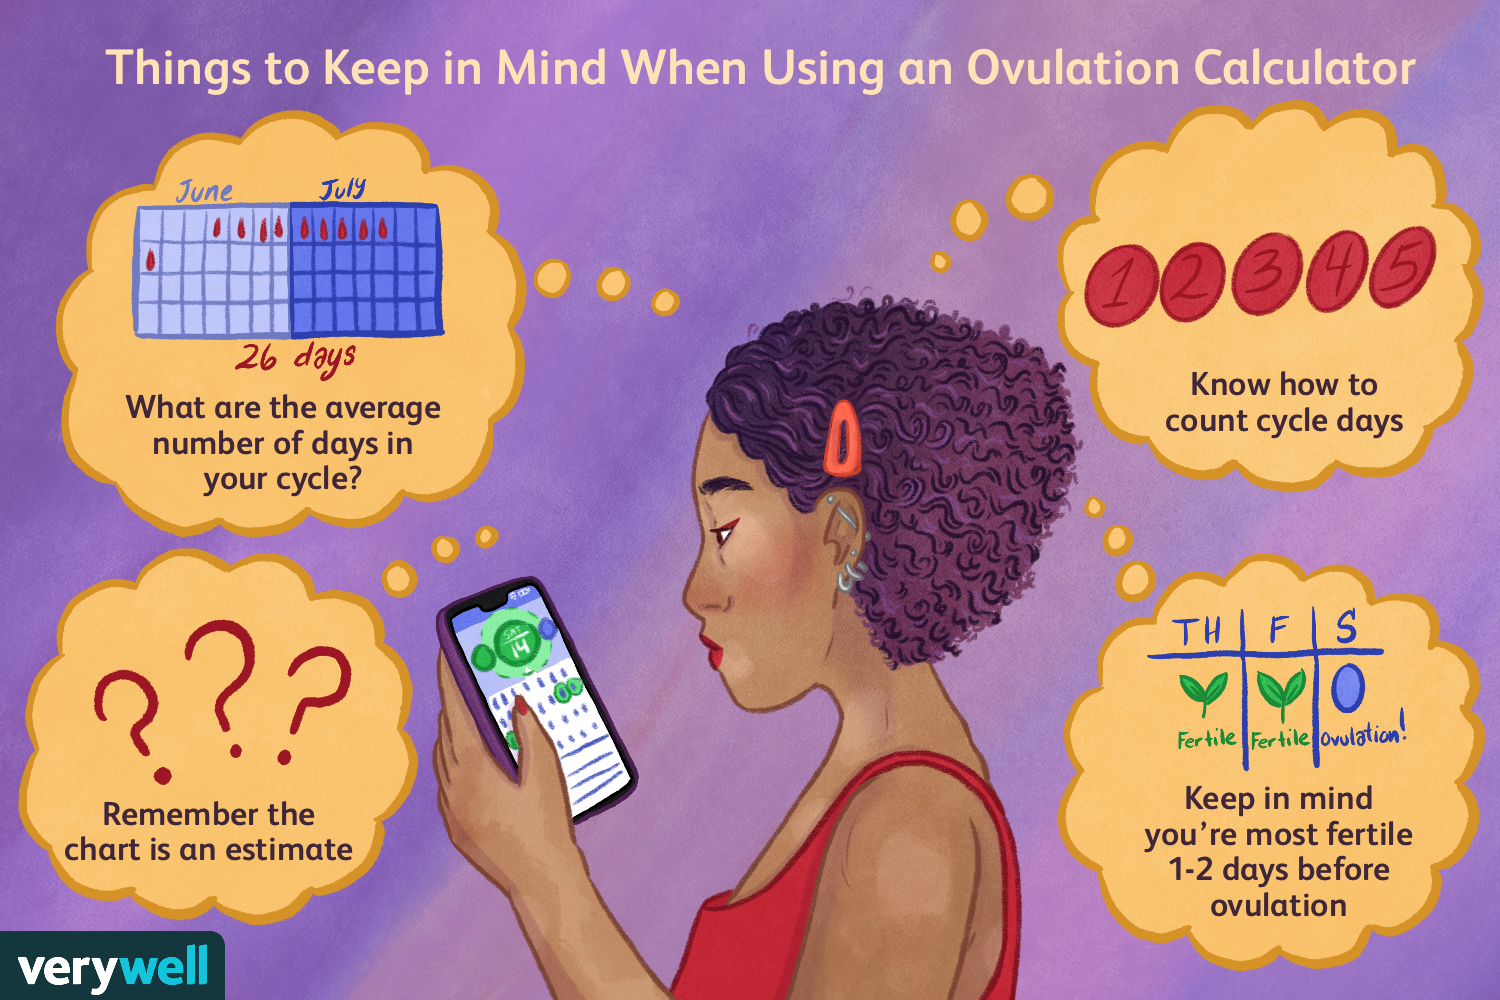 Things to keep in mind when using an ovulation calculator